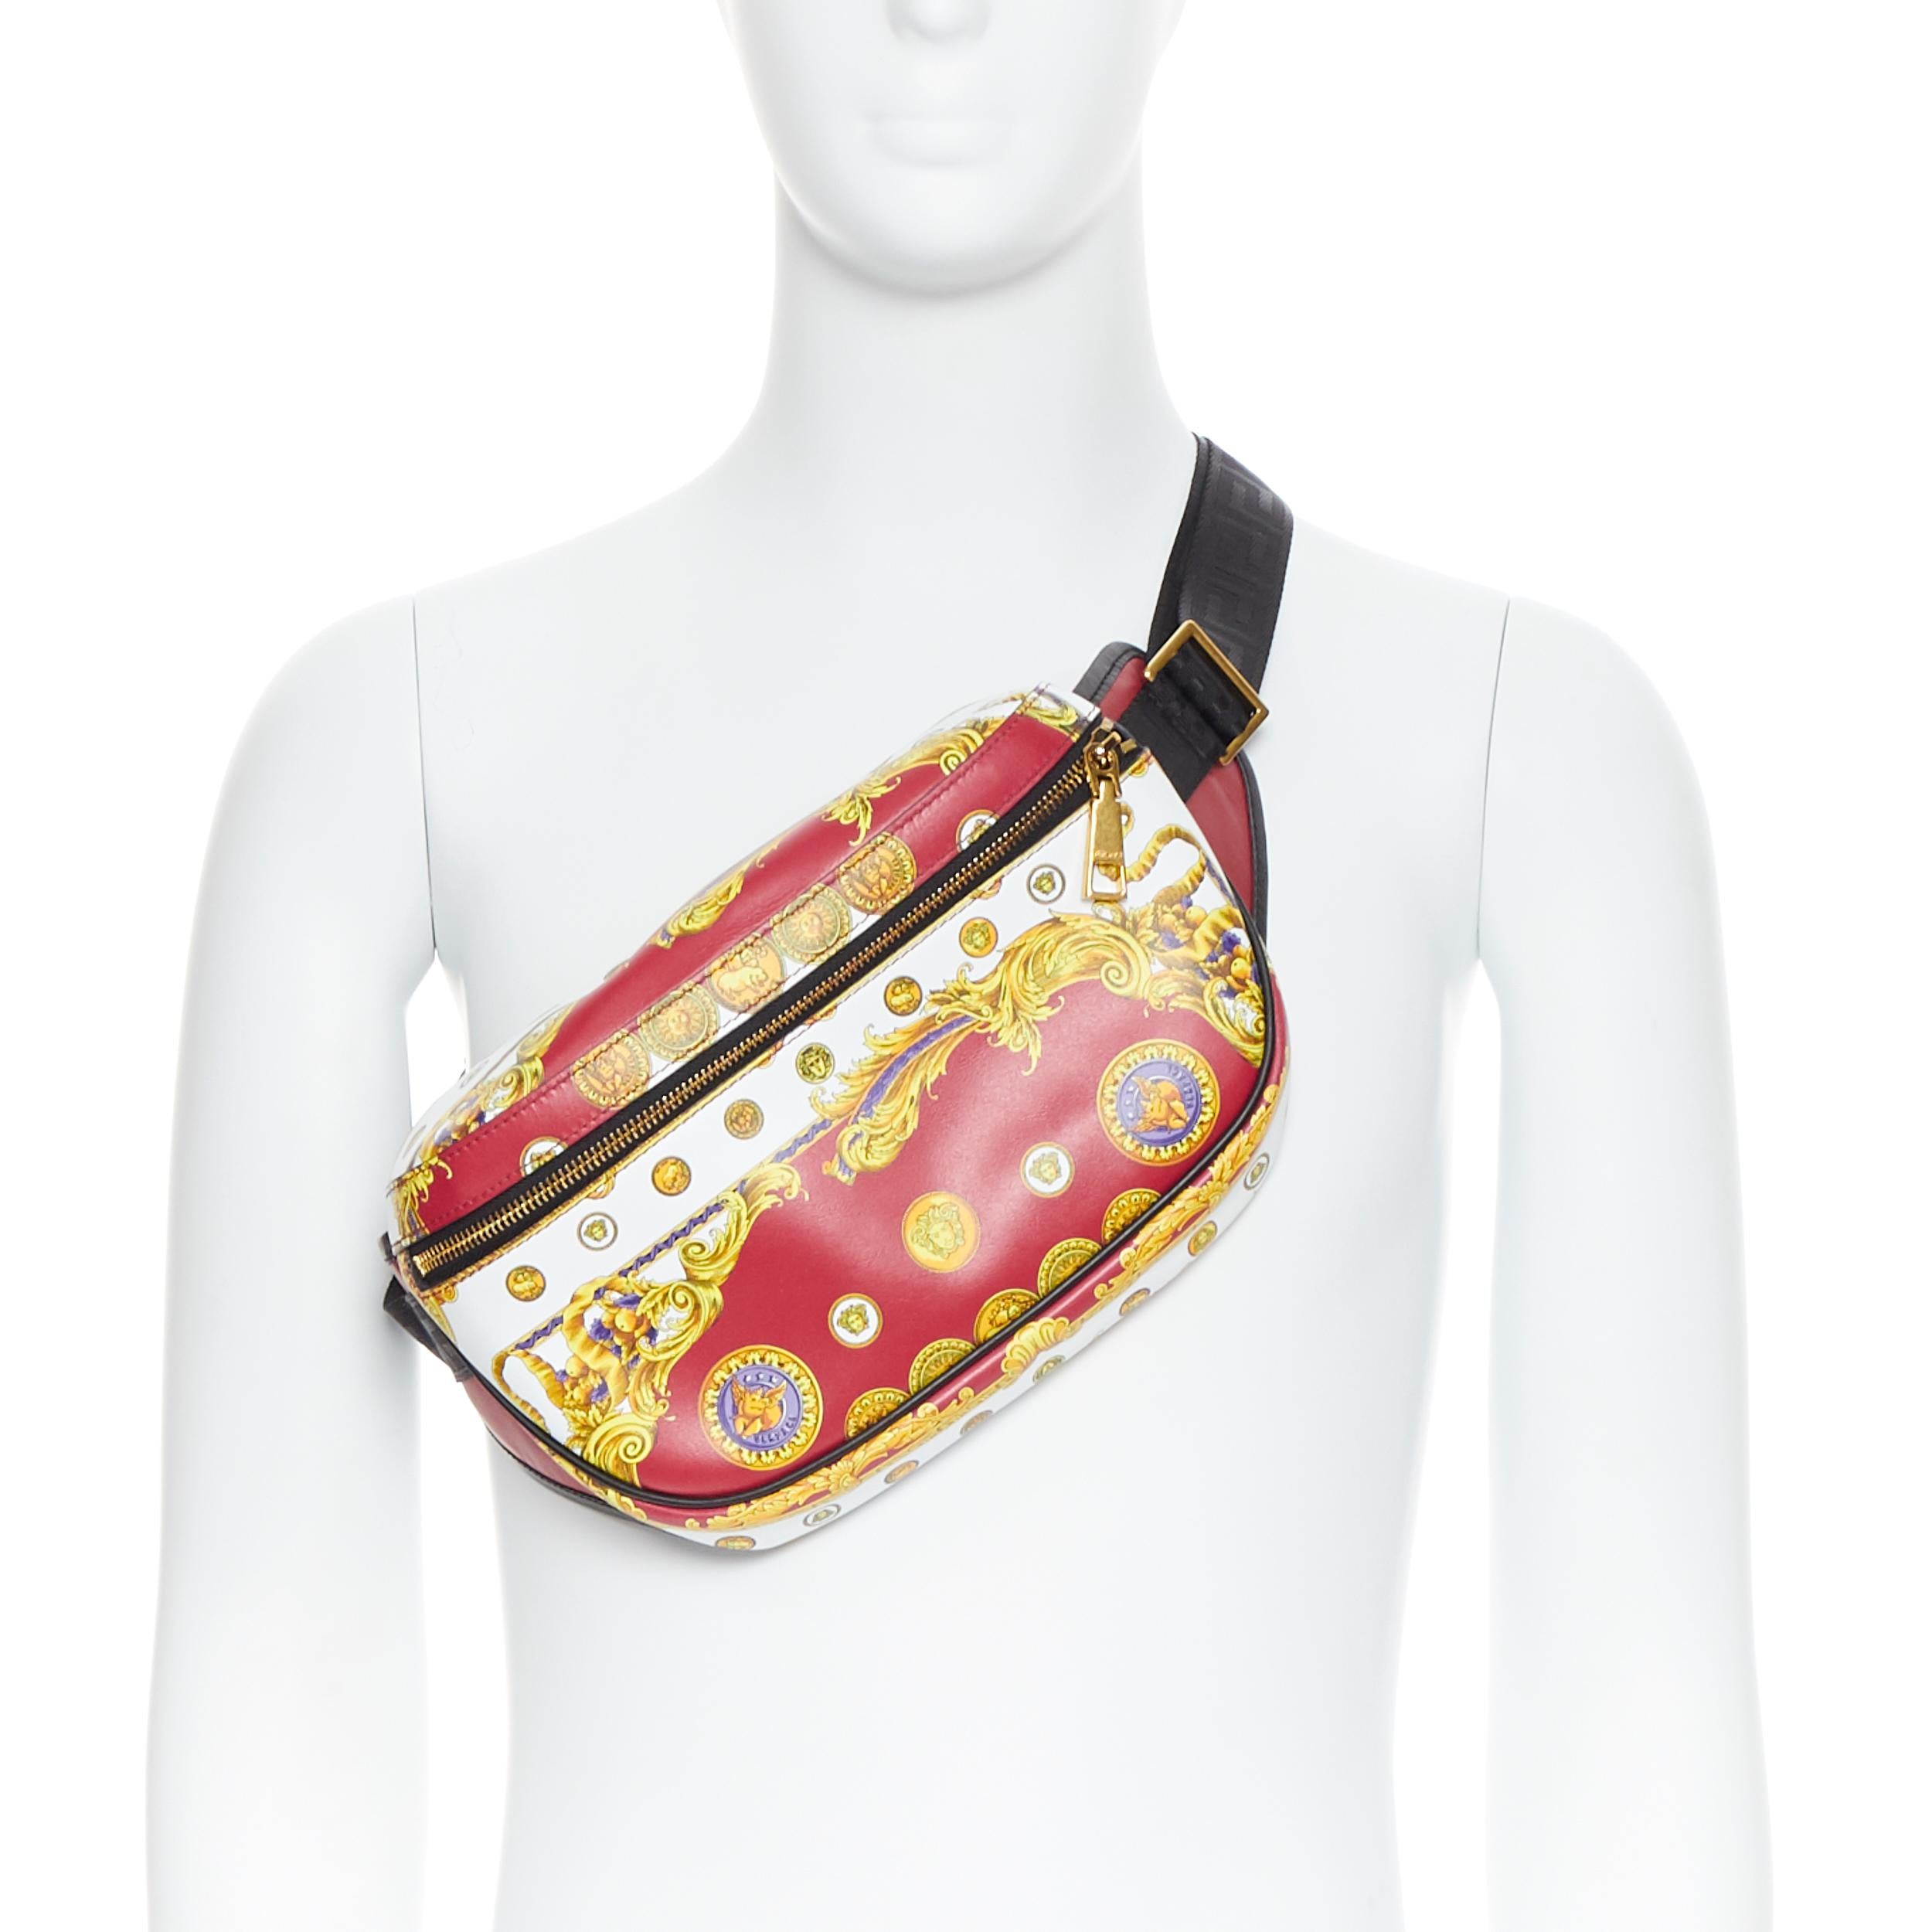 new VERSACE rare Medusa Pig Medallion coin baroque print leather waist bag 
Brand: Versace
Designer: Donatella Versace
Collection: 2019
Model Name / Style: Leather waist bag
Material: Leather
Color: Red
Pattern: Abstract
Closure: Zip
Lining